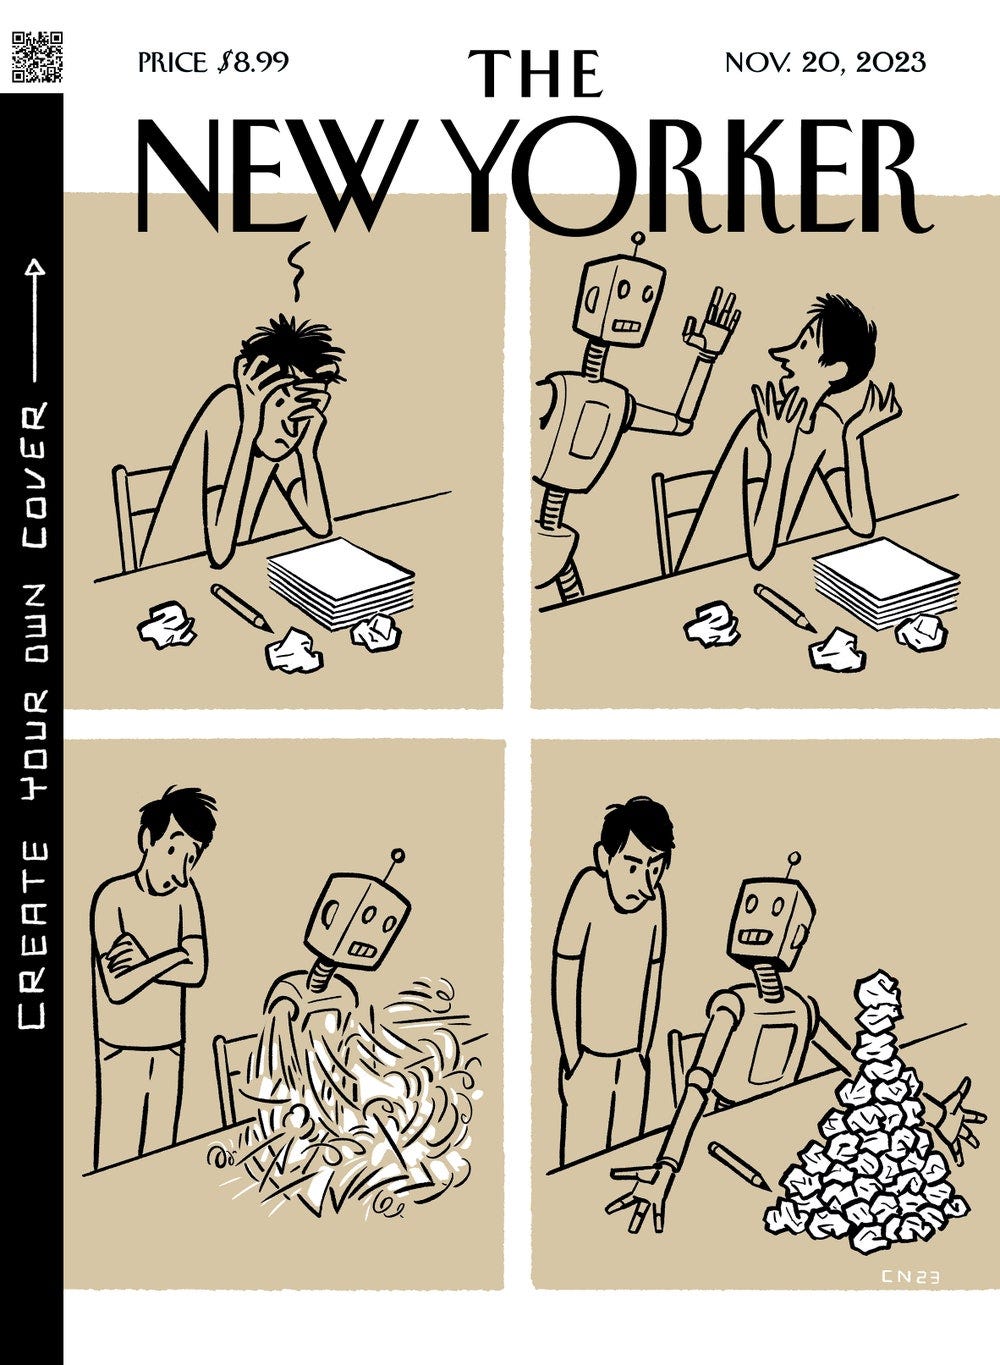 The cover of The New Yorker magazine published Nov. 20, 2023 with a cartoon showing a robot unsuccessfully helping a person overcome writers block